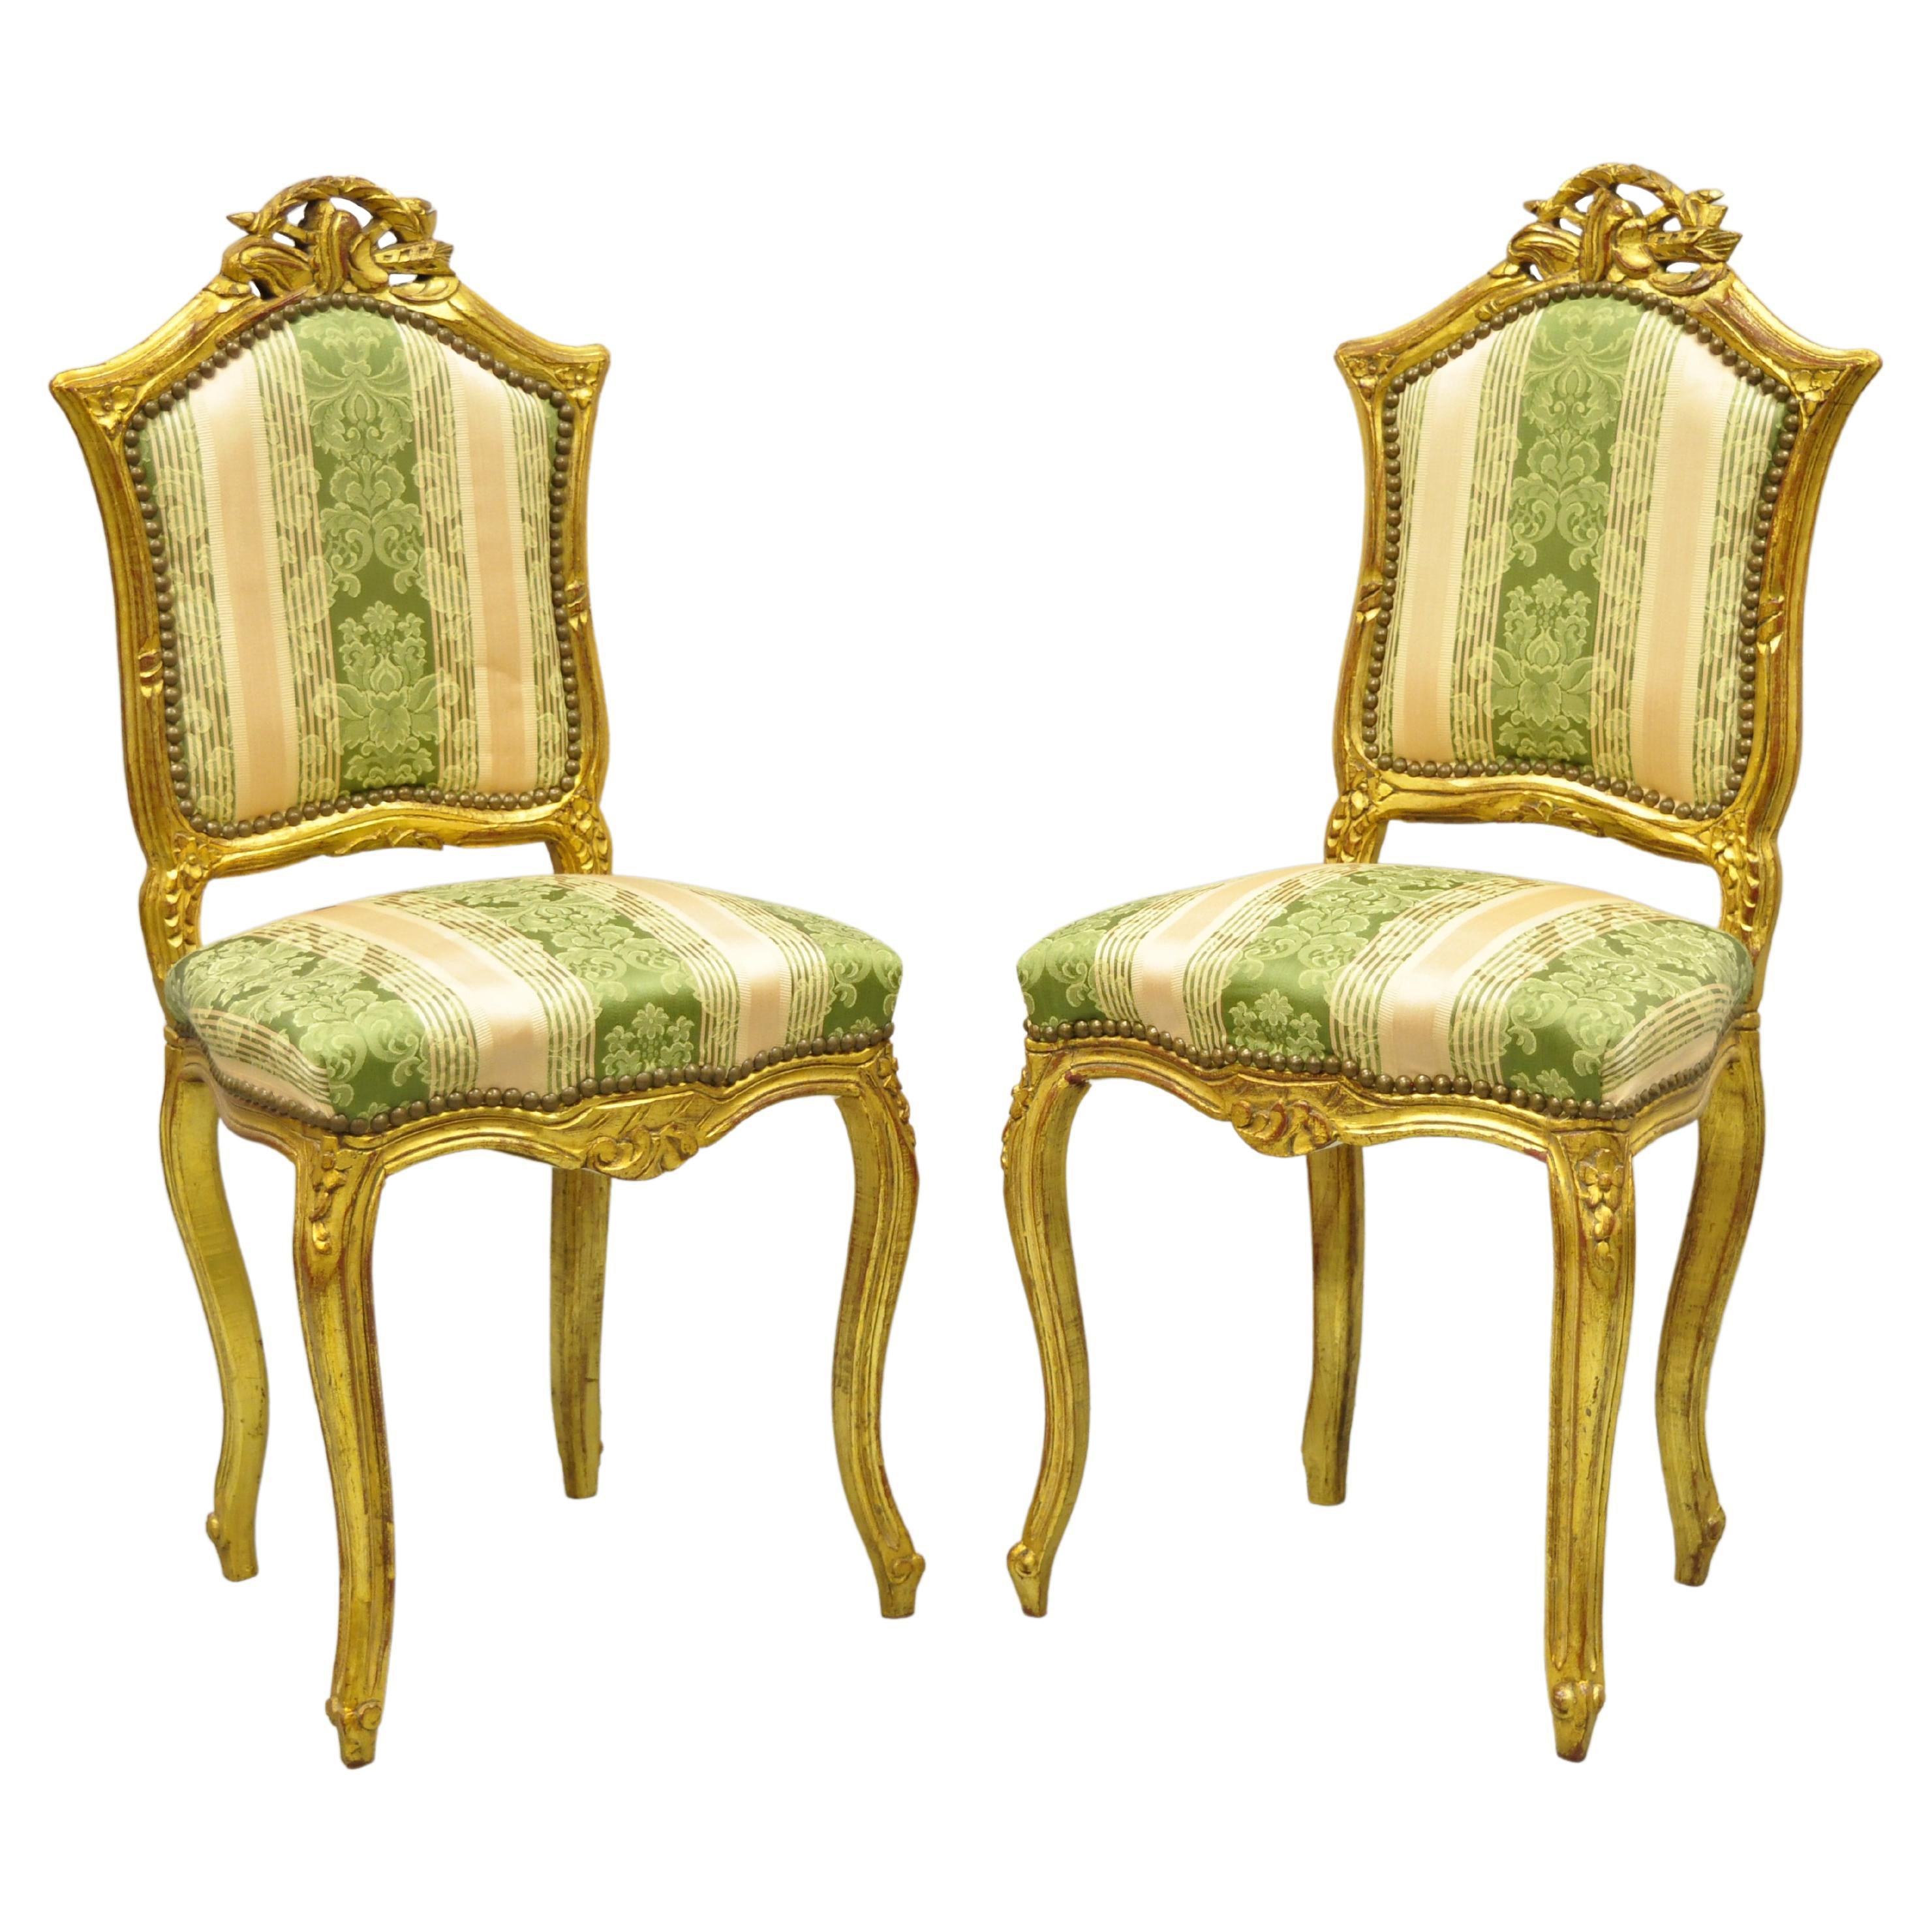 Vintage French Louis XV Style Gold Giltwood Carved Boudoir Side Chairs, a Pair